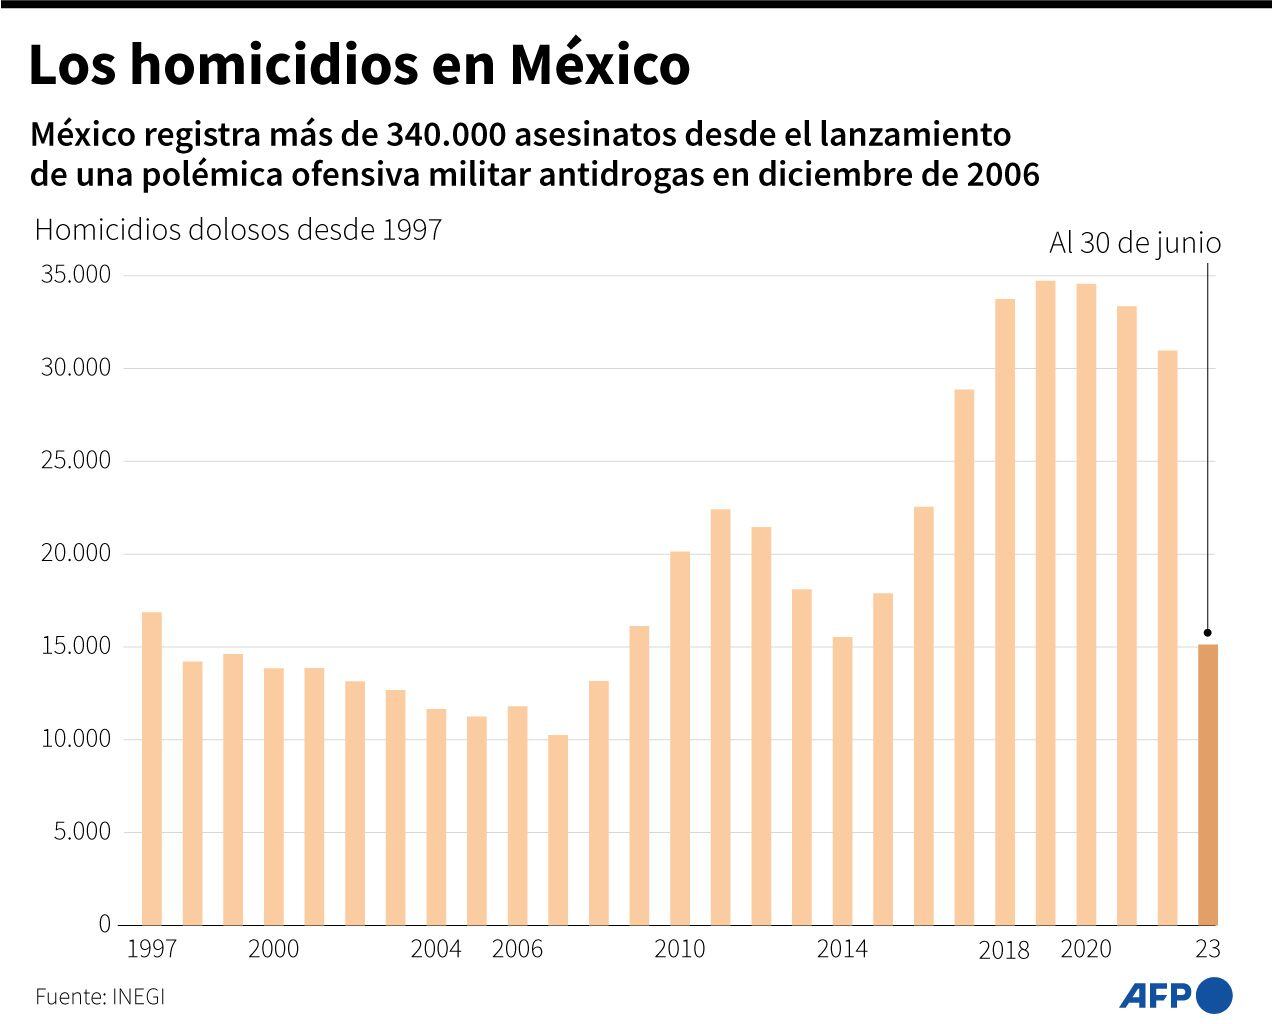 Homicides in Mexico since 1997. (AFP).